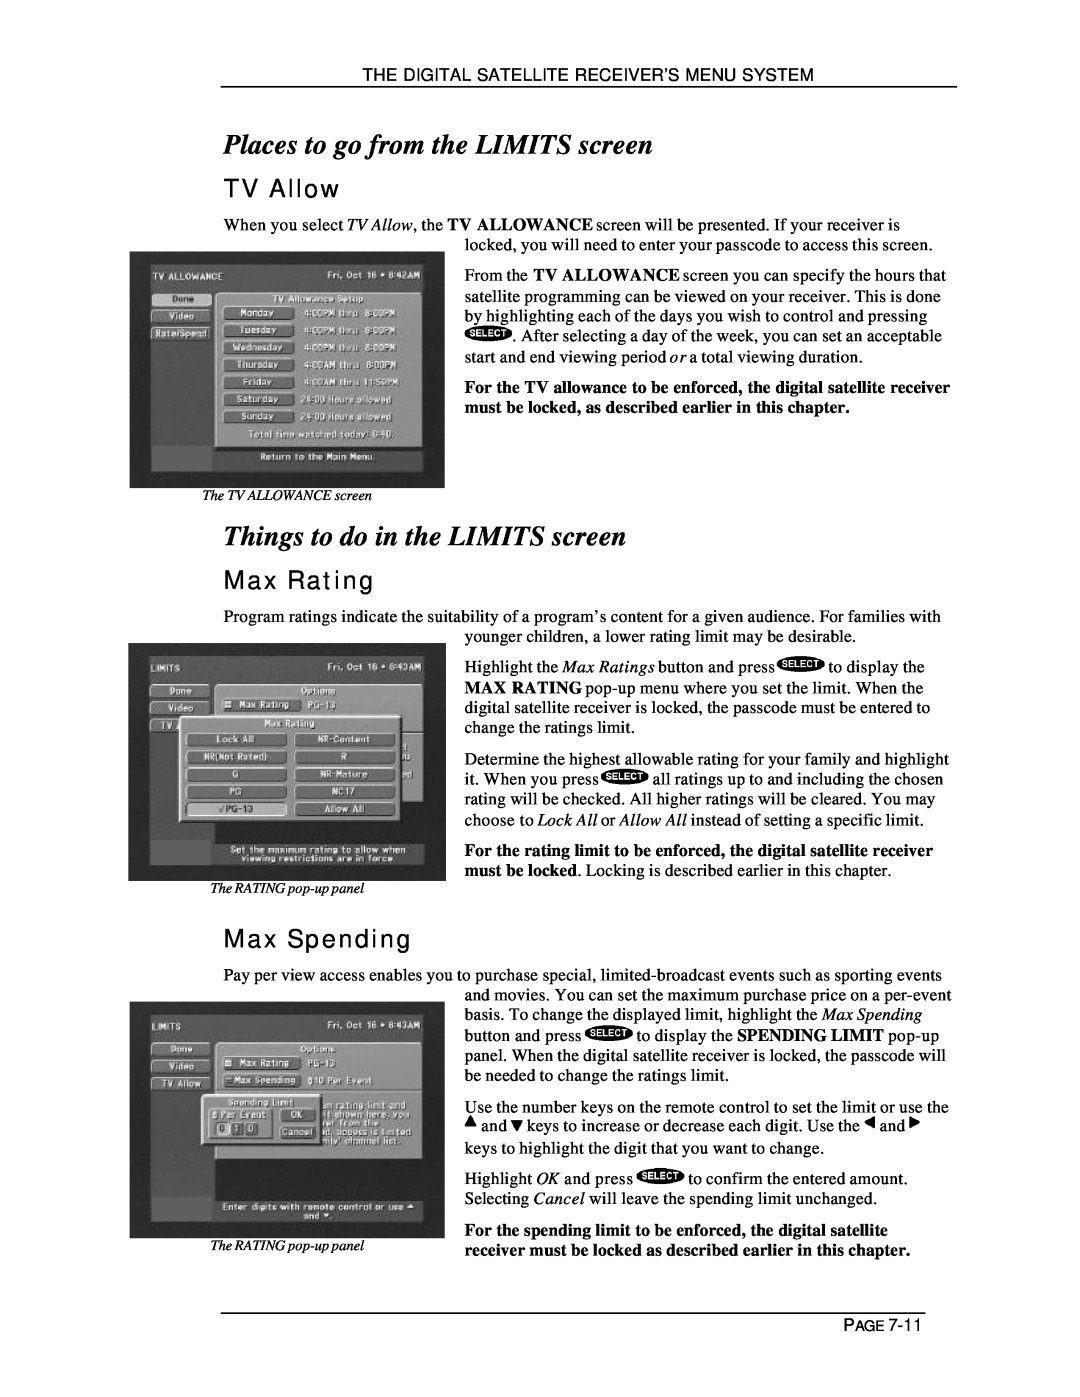 DirecTV HIRD-D11, HIRD-D01 Places to go from the LIMITS screen, Things to do in the LIMITS screen, TV Allow, Max Rating 